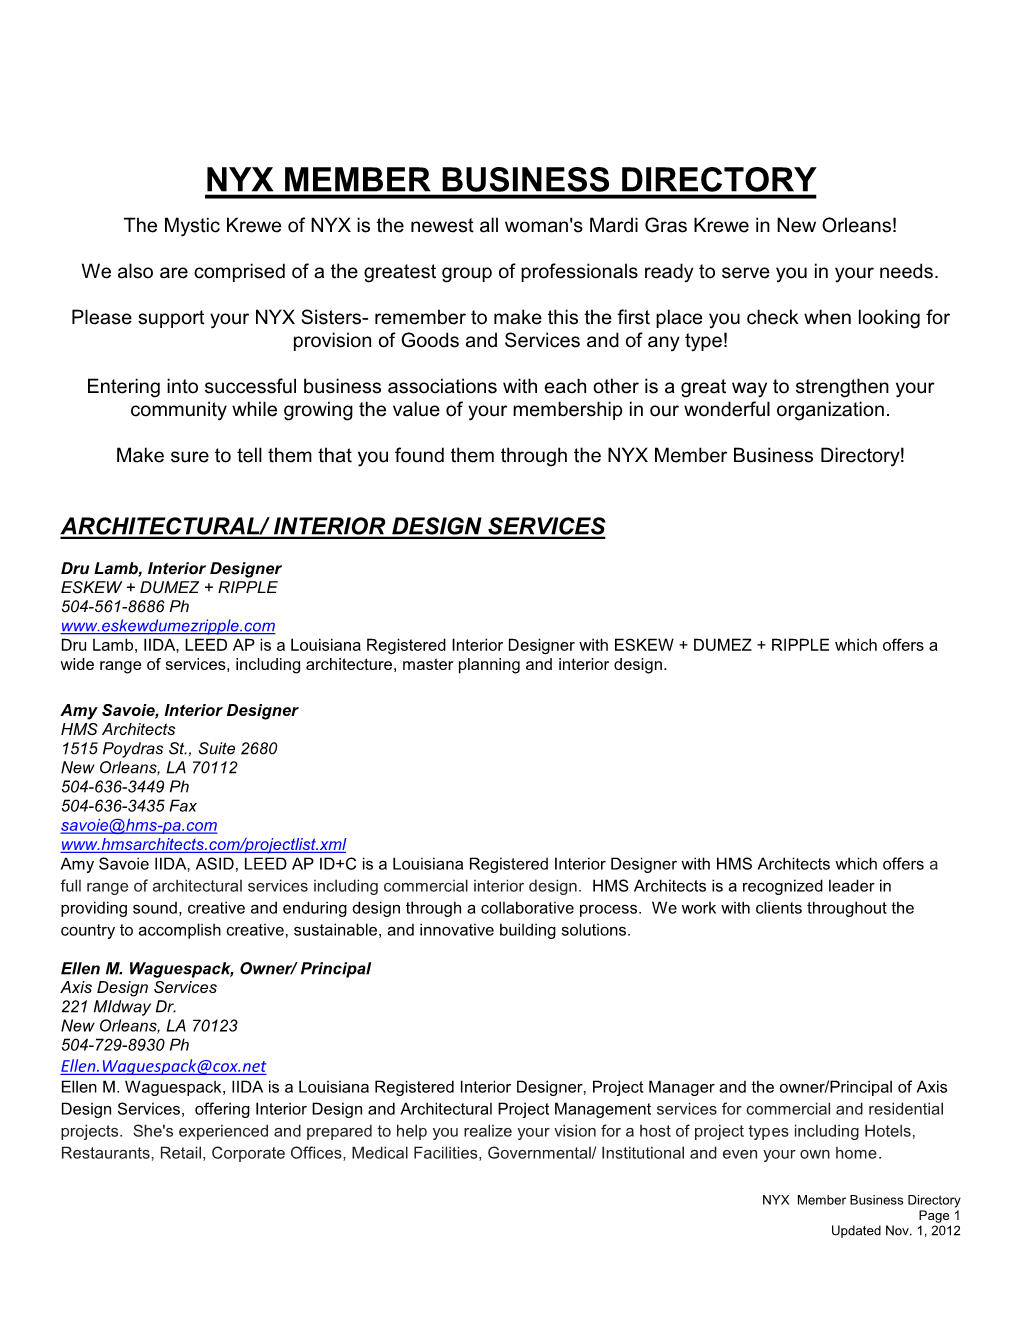 NYX MEMBER BUSINESS DIRECTORY the Mystic Krewe of NYX Is the Newest All Woman's Mardi Gras Krewe in New Orleans!